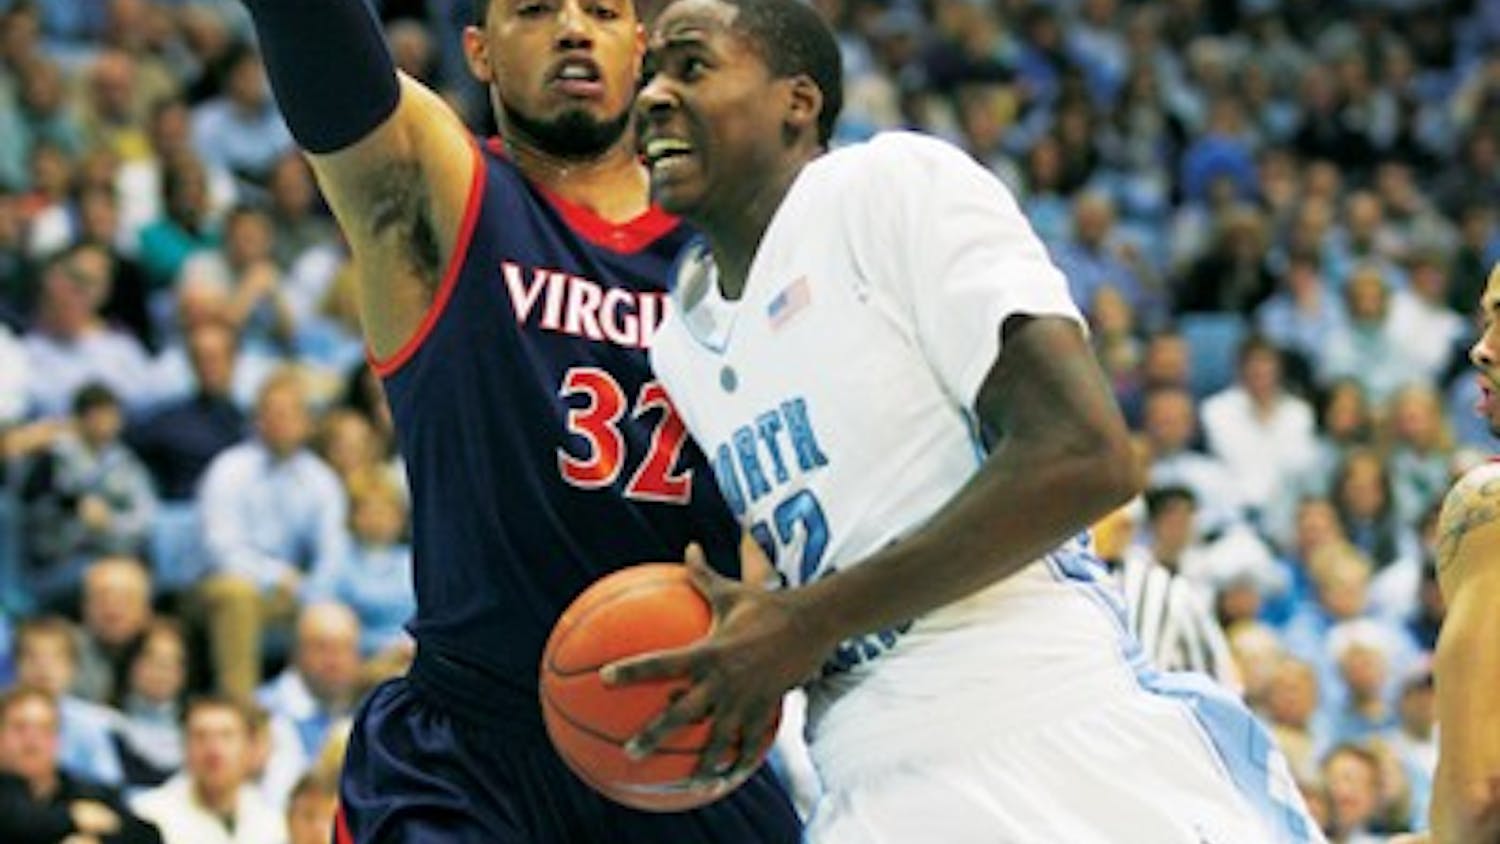 Ed Davis, usually one of UNC's leading scorers, contributed only 4 points in Sunday's loss to Virginia. DTH/Will Cooper